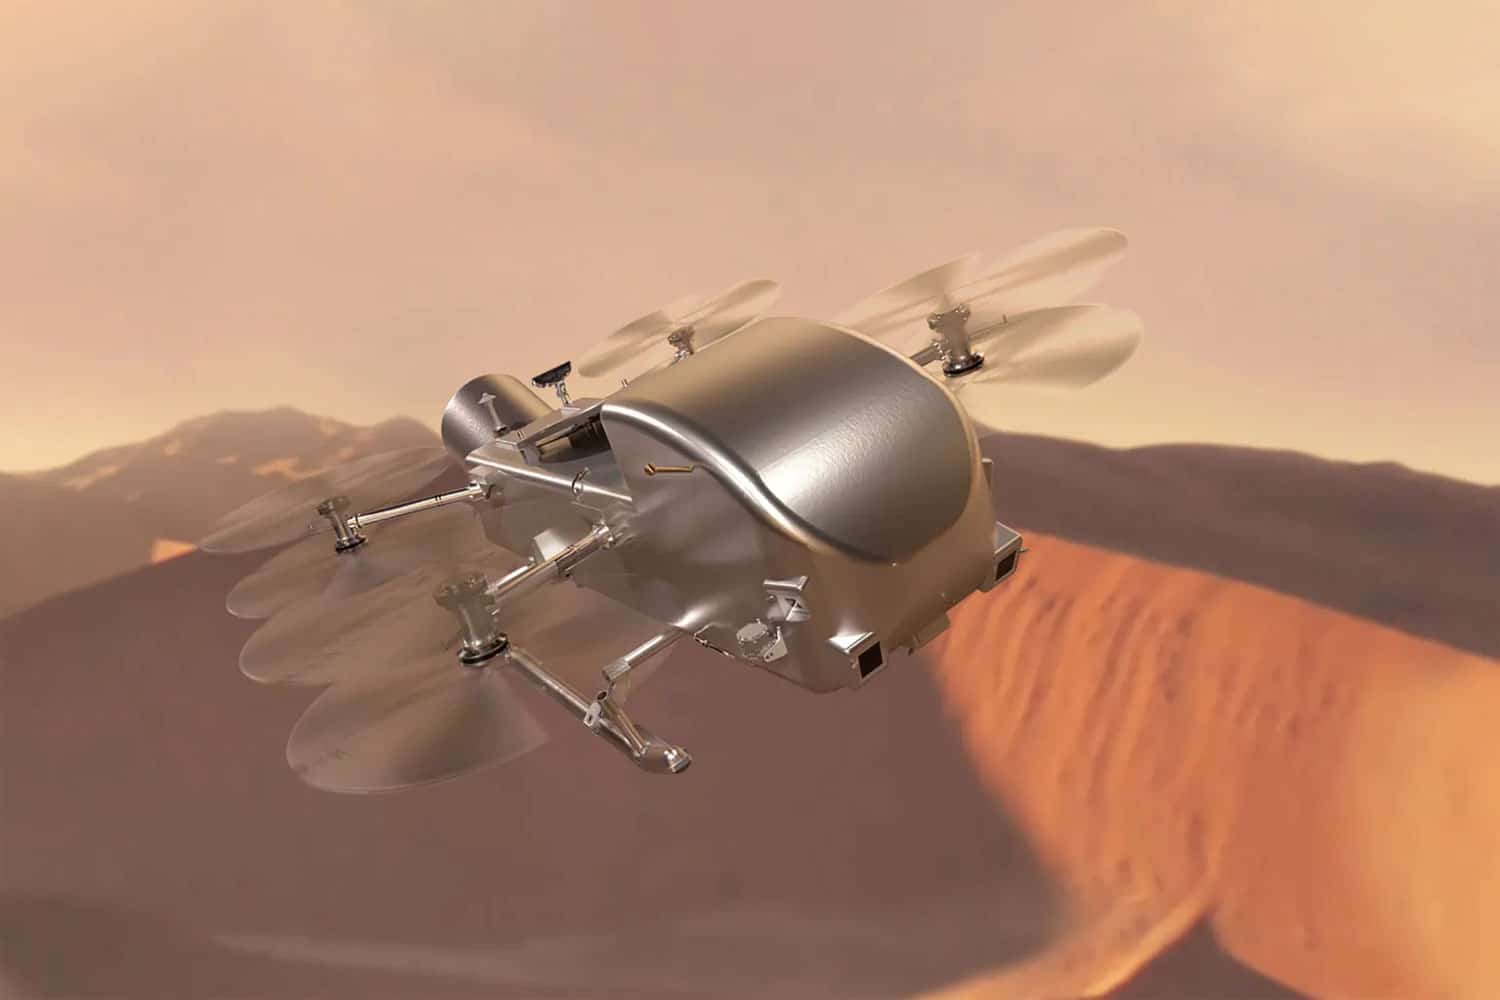 Artist’s concept of Dragonfly soaring over the dunes of Saturn’s moon Titan.